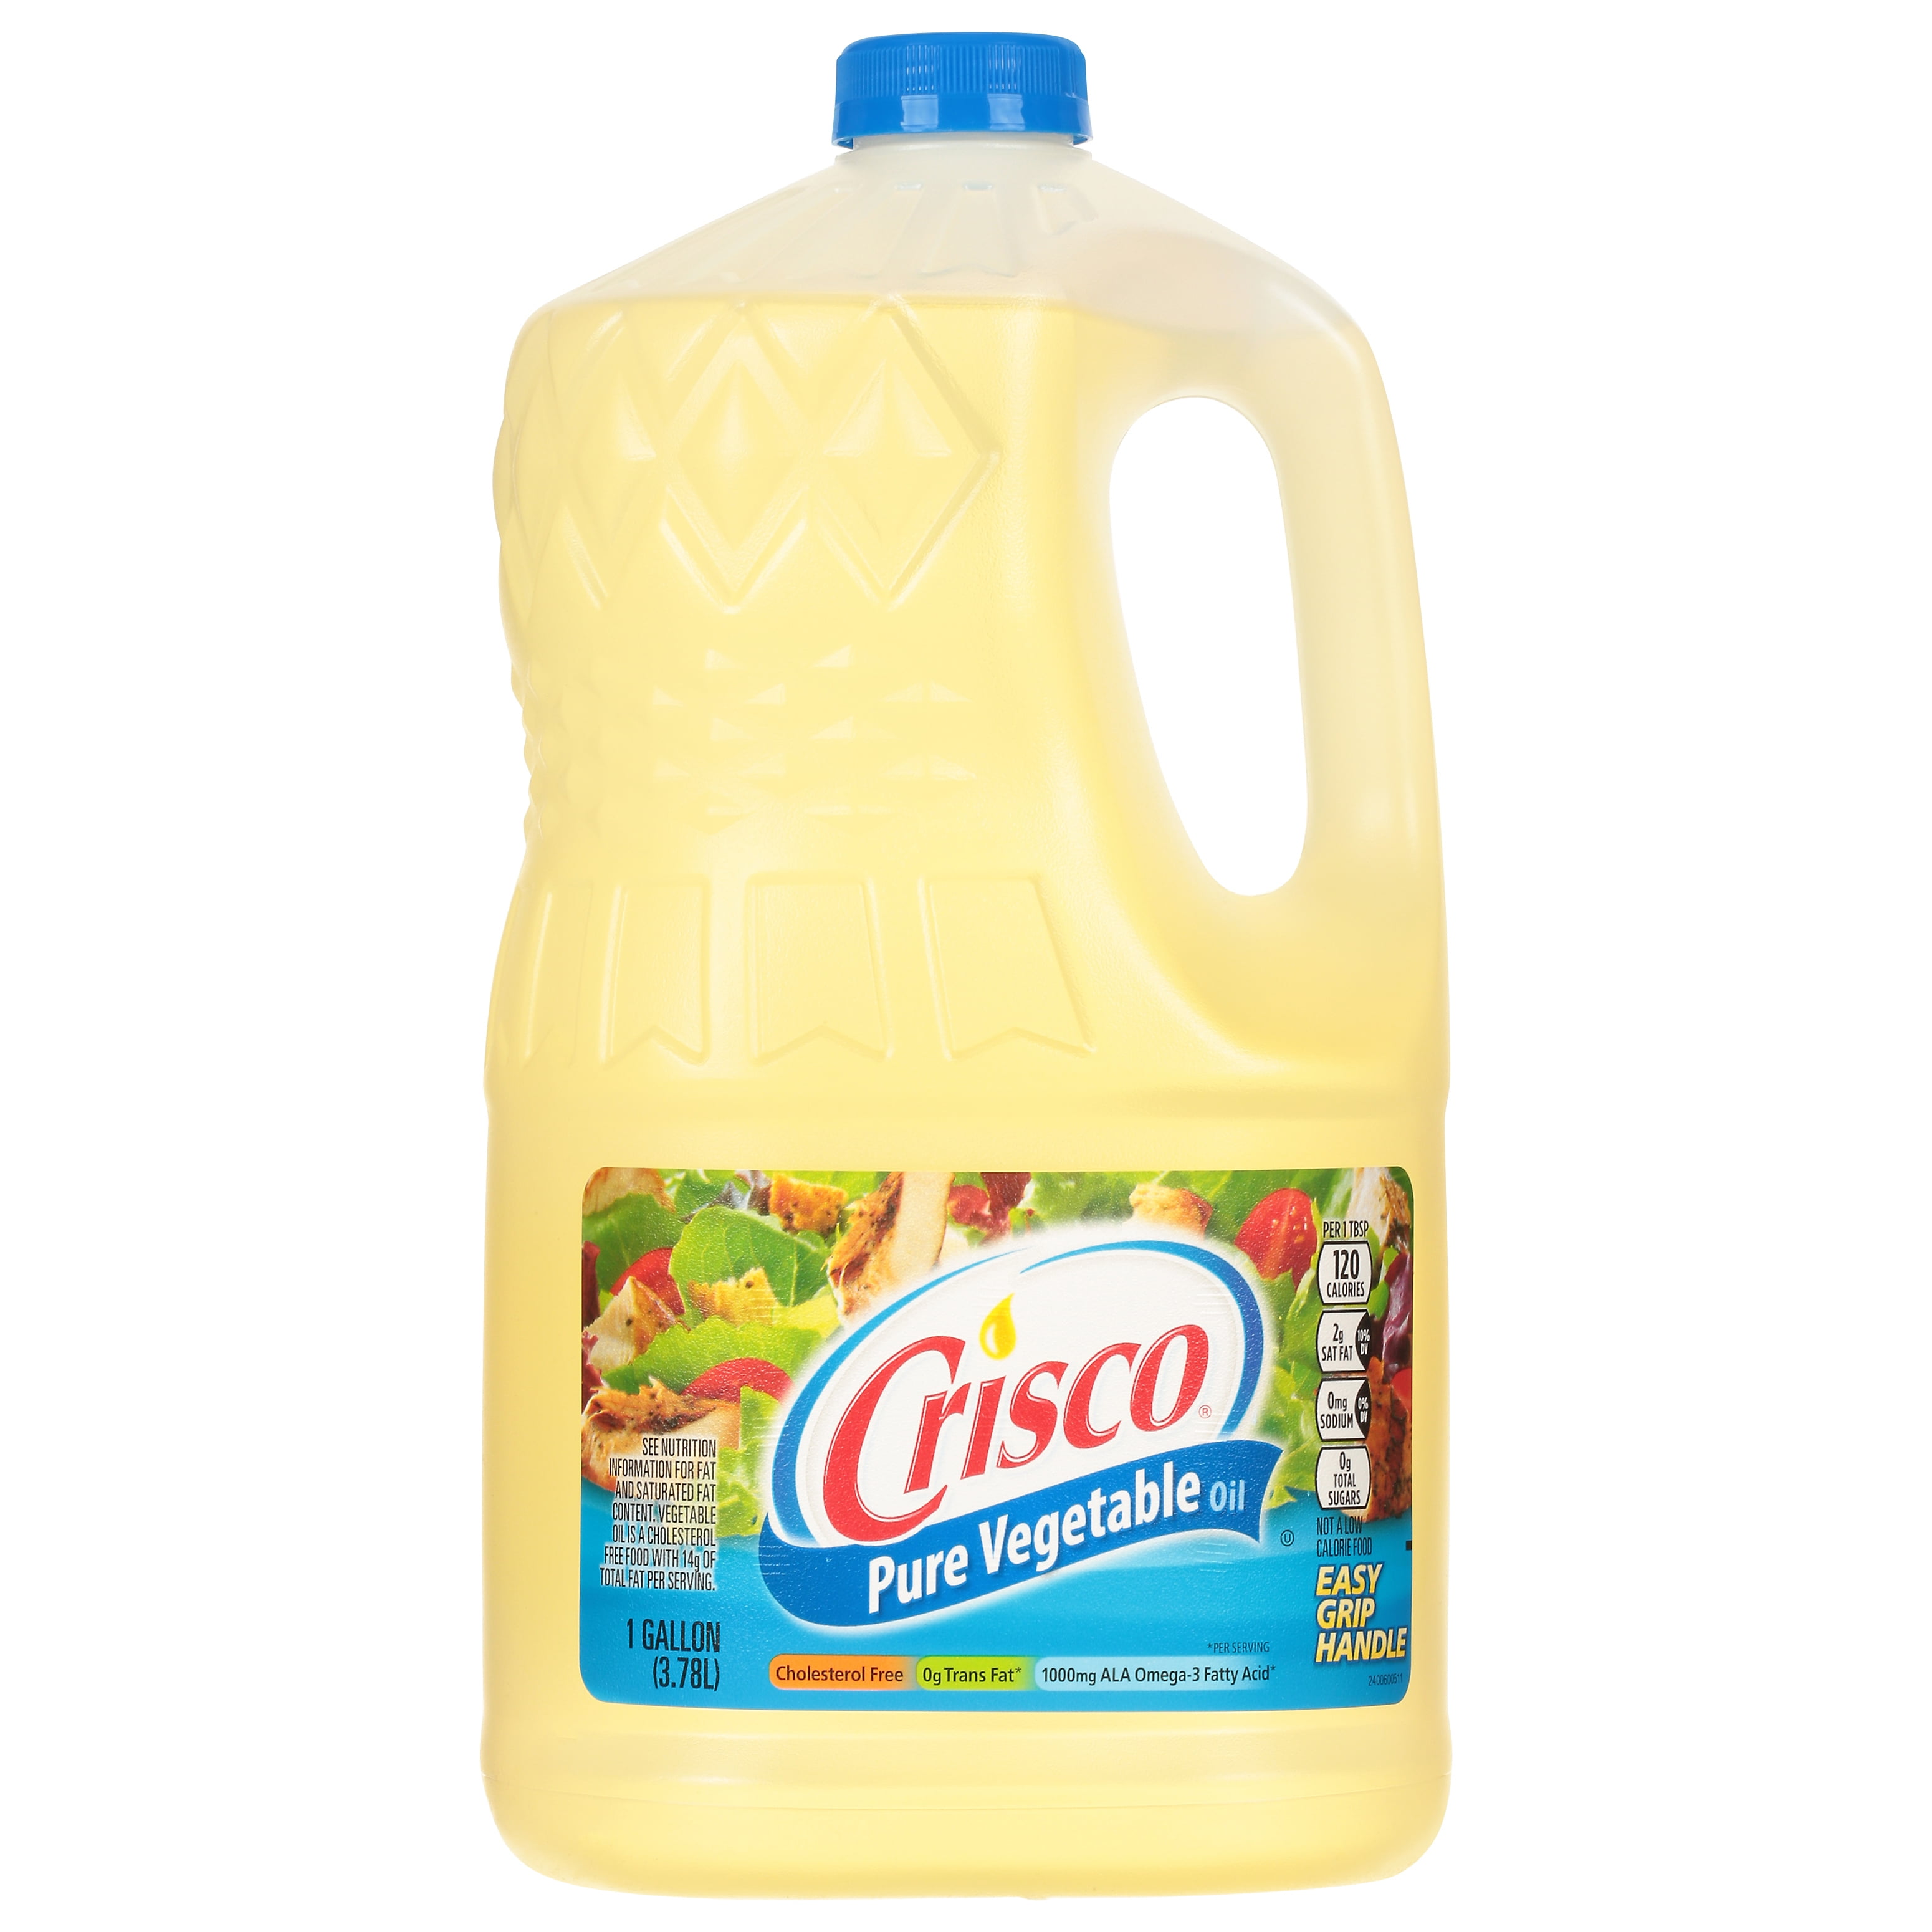 Crisco Oil Based Lubricant 453 g